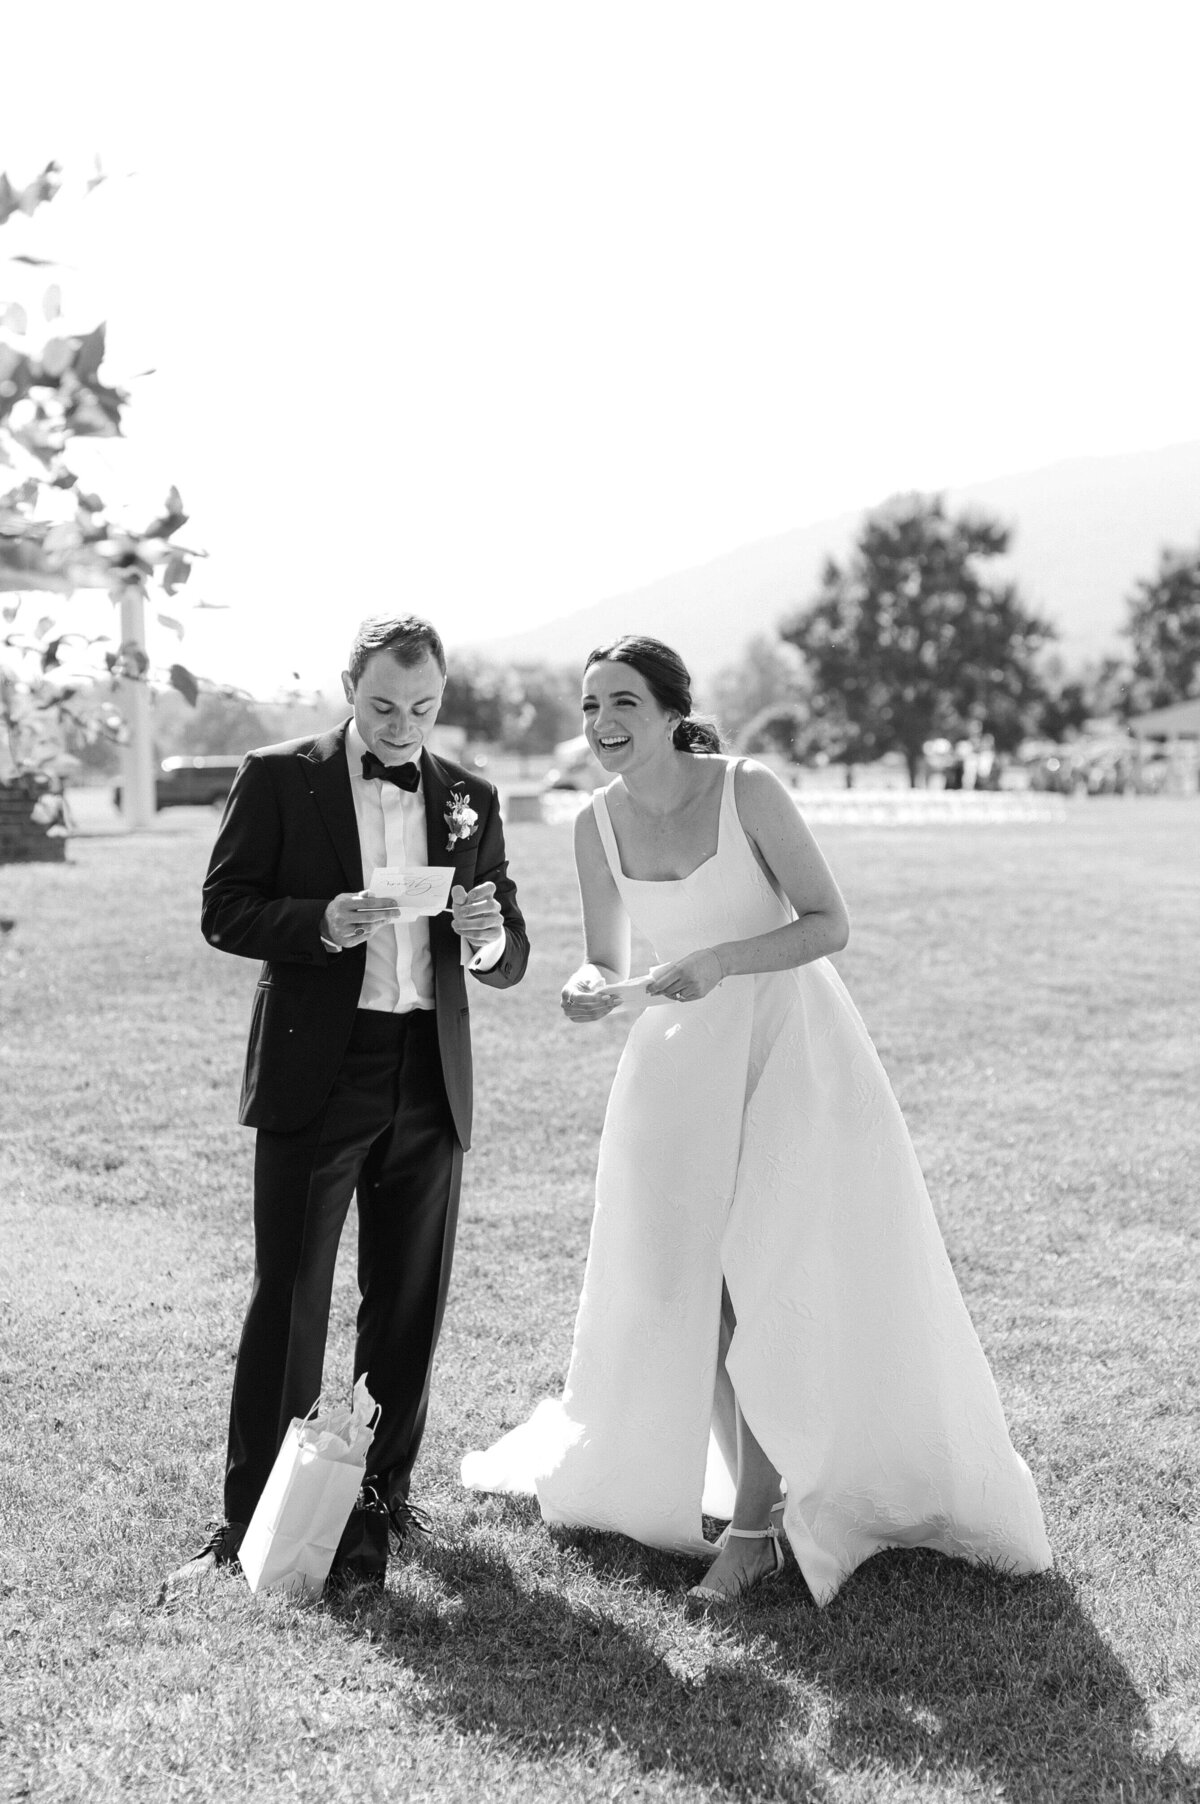 A B&W image of a bride and groom reading their vows to one another at a vineyard venue right outside of DC.